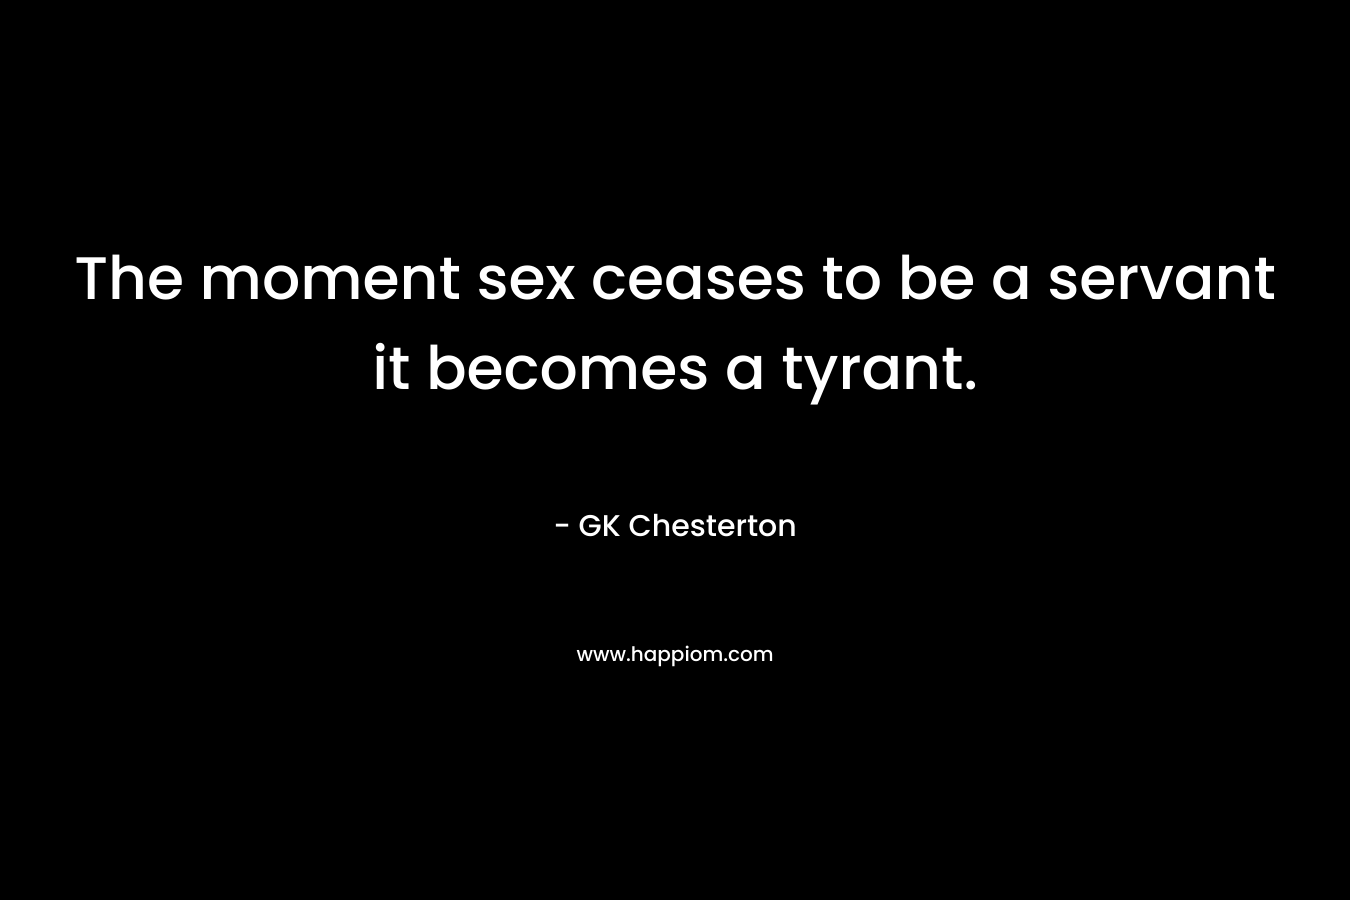 The moment sex ceases to be a servant it becomes a tyrant. – GK Chesterton